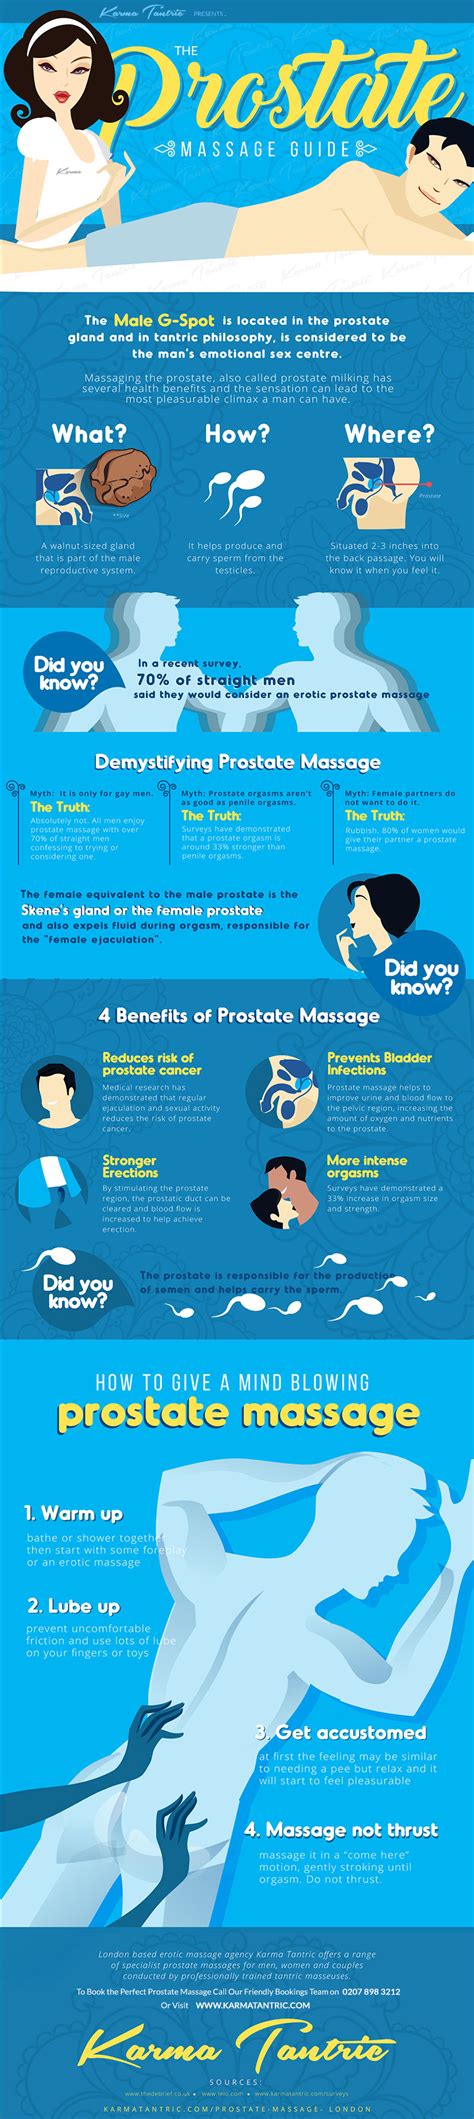 How To Give A Prostate Massage – The Ultimate Beducated Guide